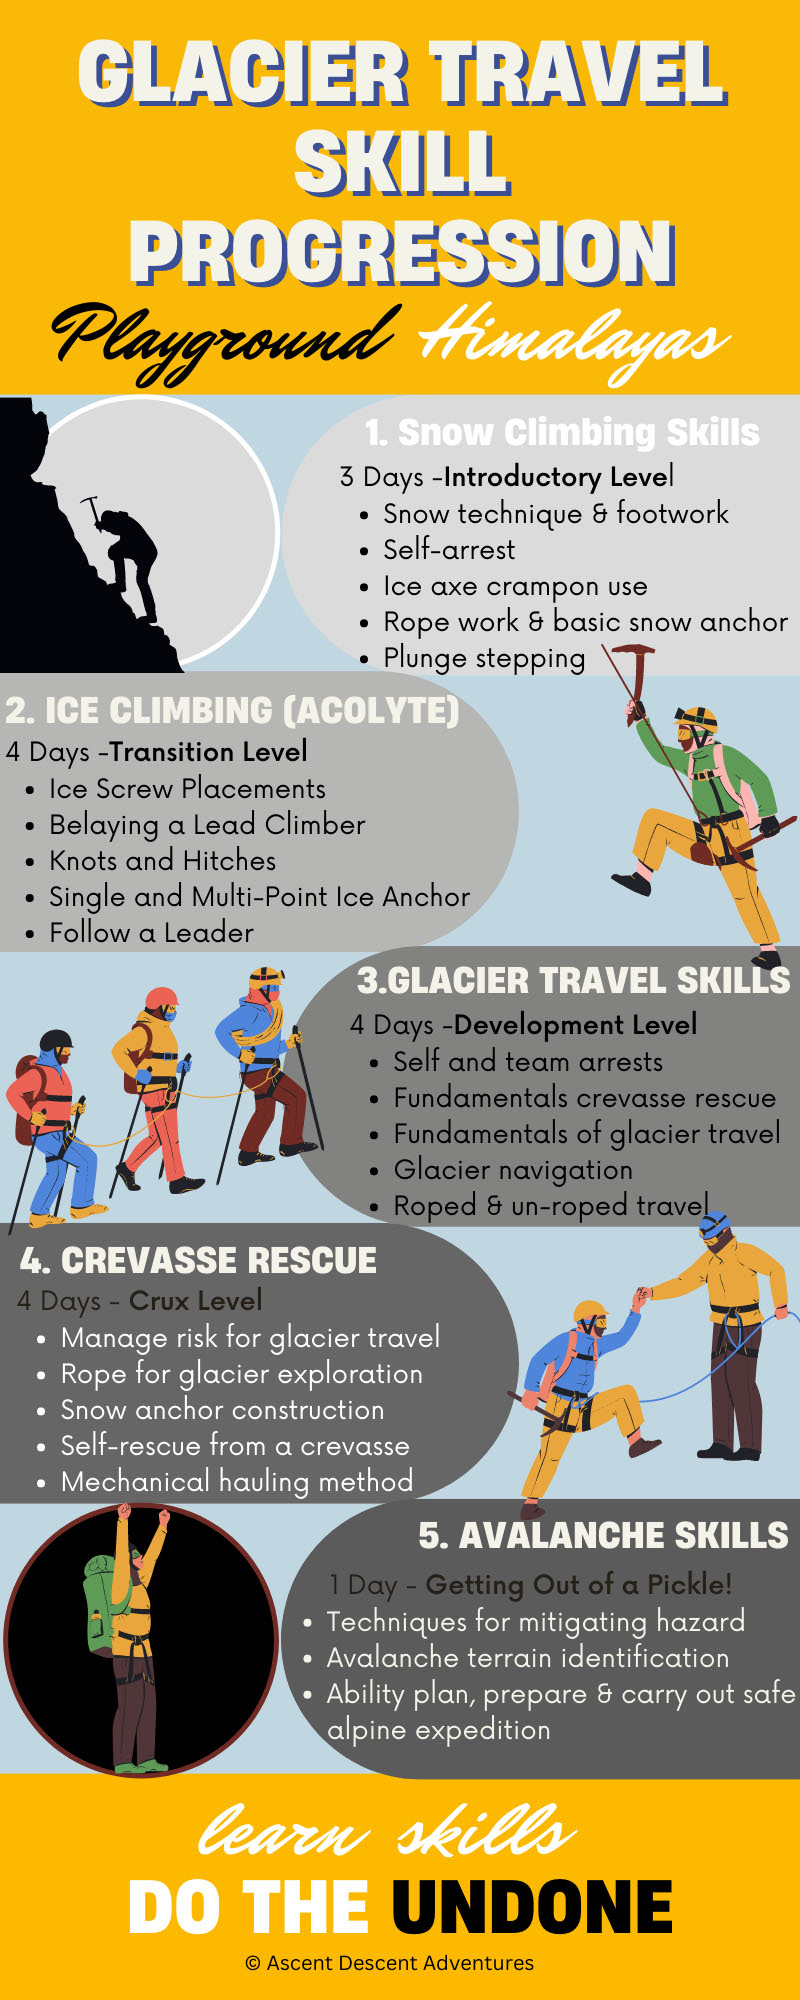 Glacier travel progression infographic demonstrating evolution from beginner snow skills to ice climbing intermediate level, glacier travel skills development level, crevasse rescue climax level, and avalance rescue methods with silhouette and color rich symbols of climbers ice axe and ropes.